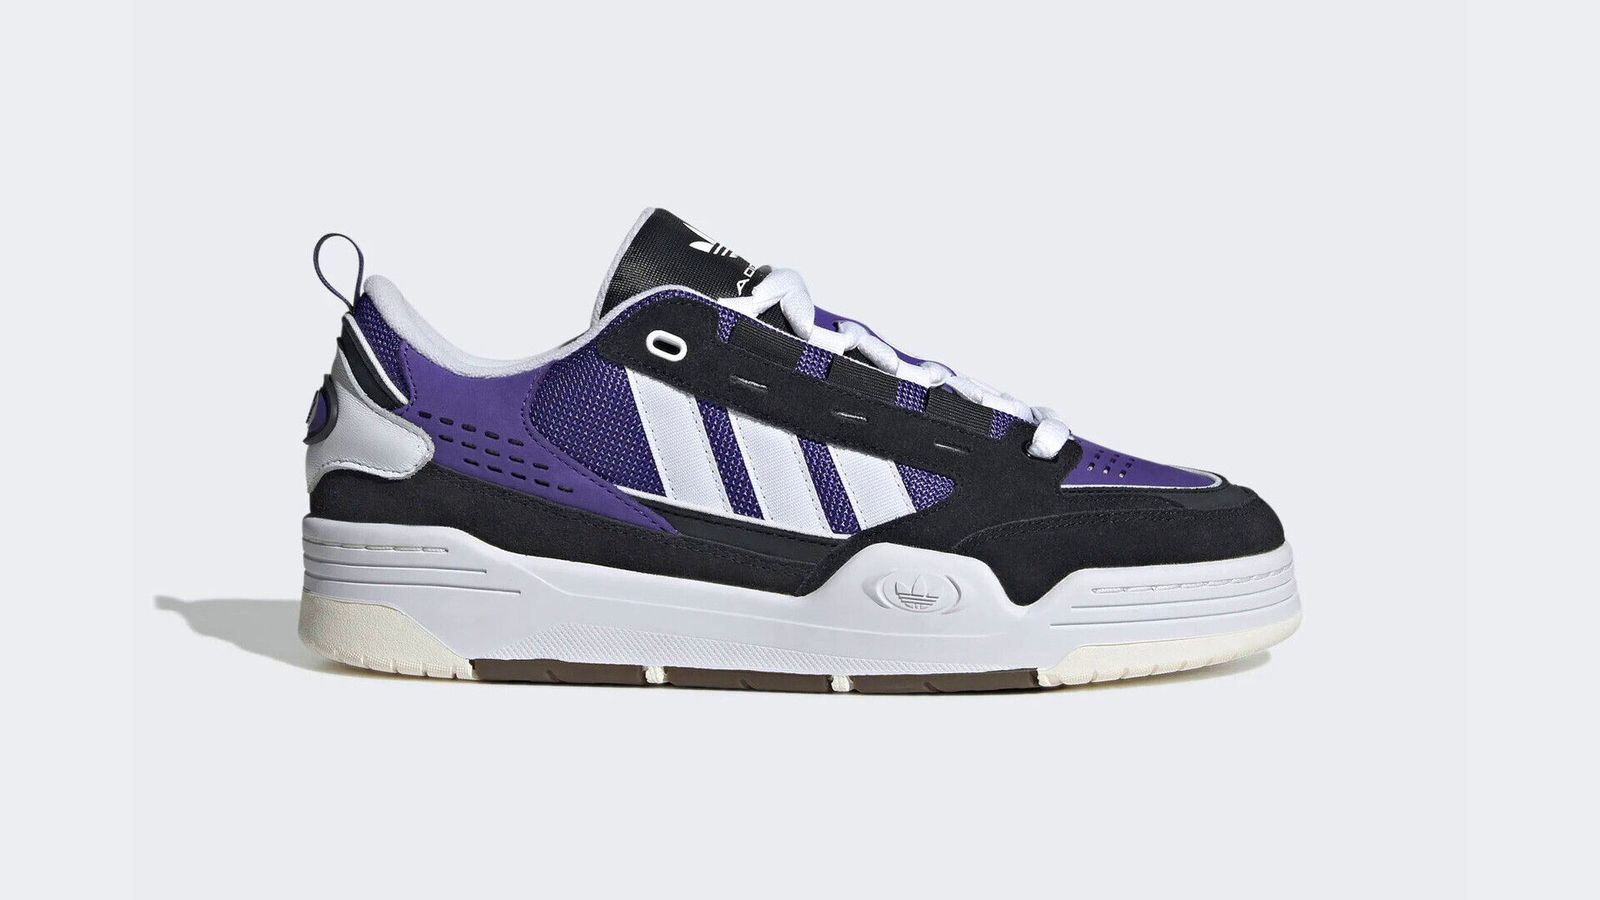 adidas Originals ADI2000 product image of a purple and black sneaker with white accents and midsole.